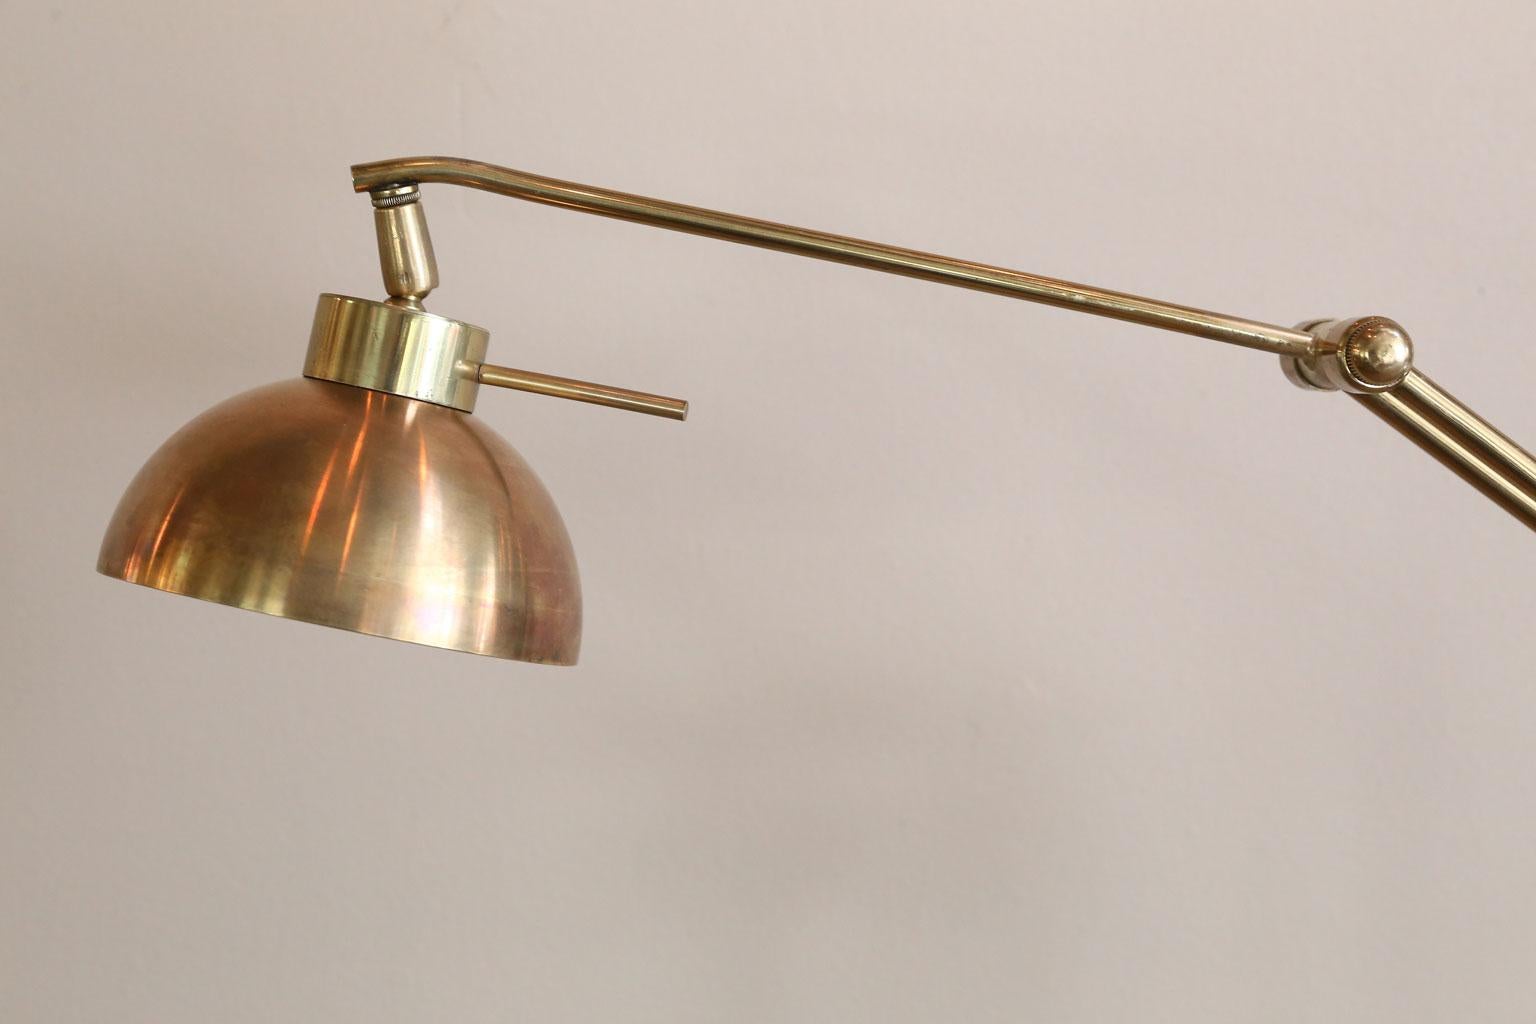 French Modern Polychrome Brass Floor Lamp with Moveable Arm from France